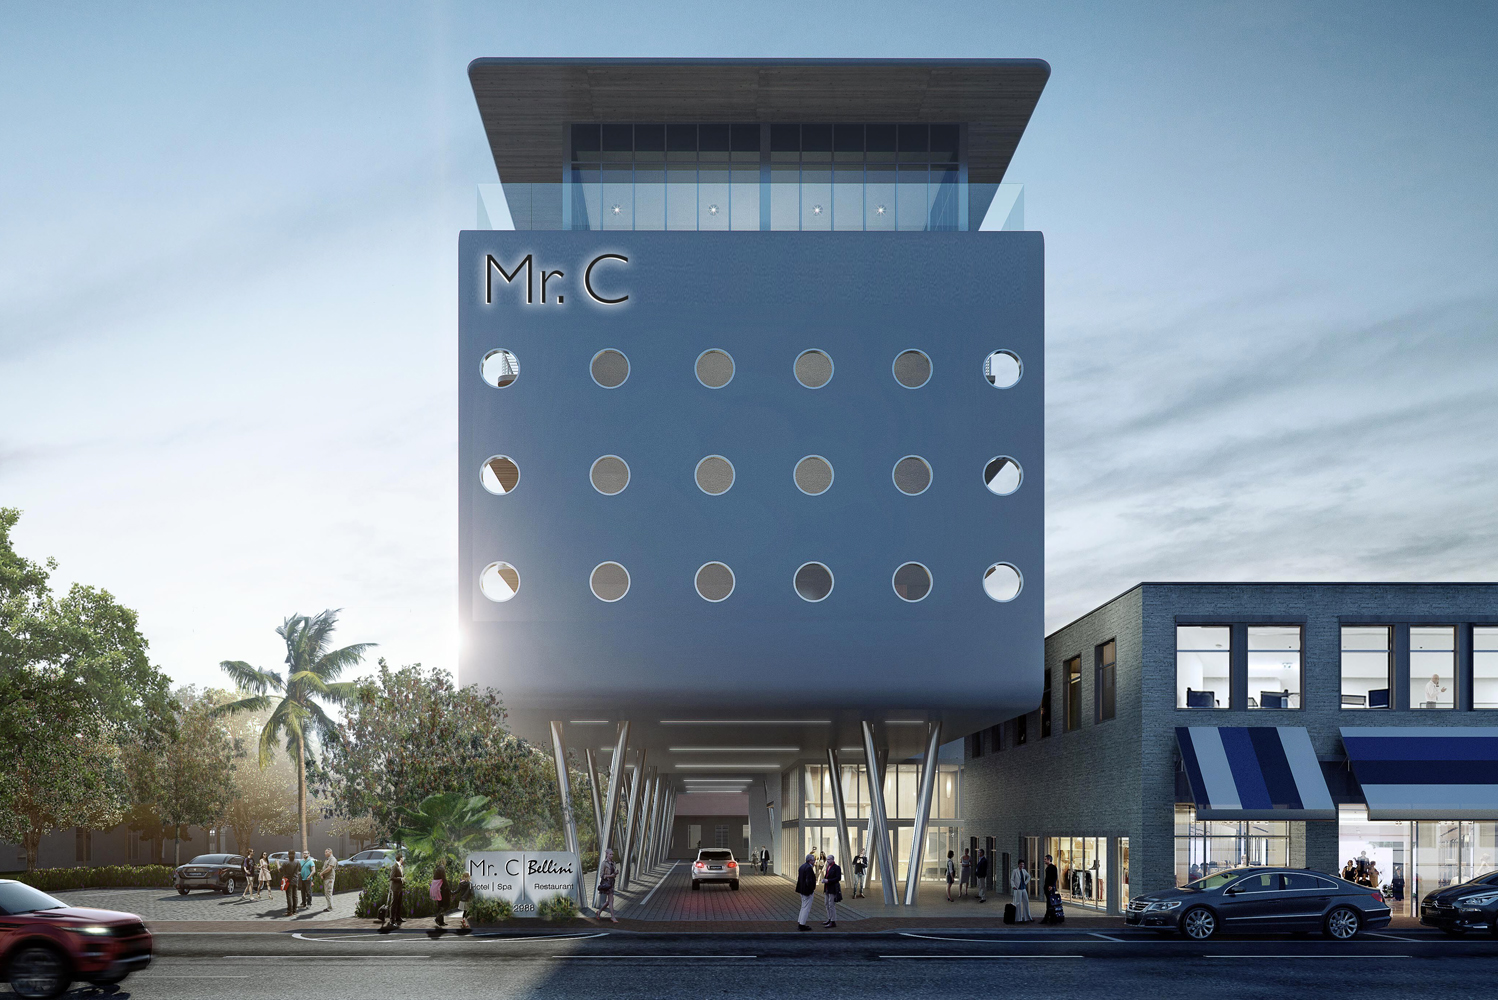 Mr C Hotel is slated to open its first property in Florida this spring 2019